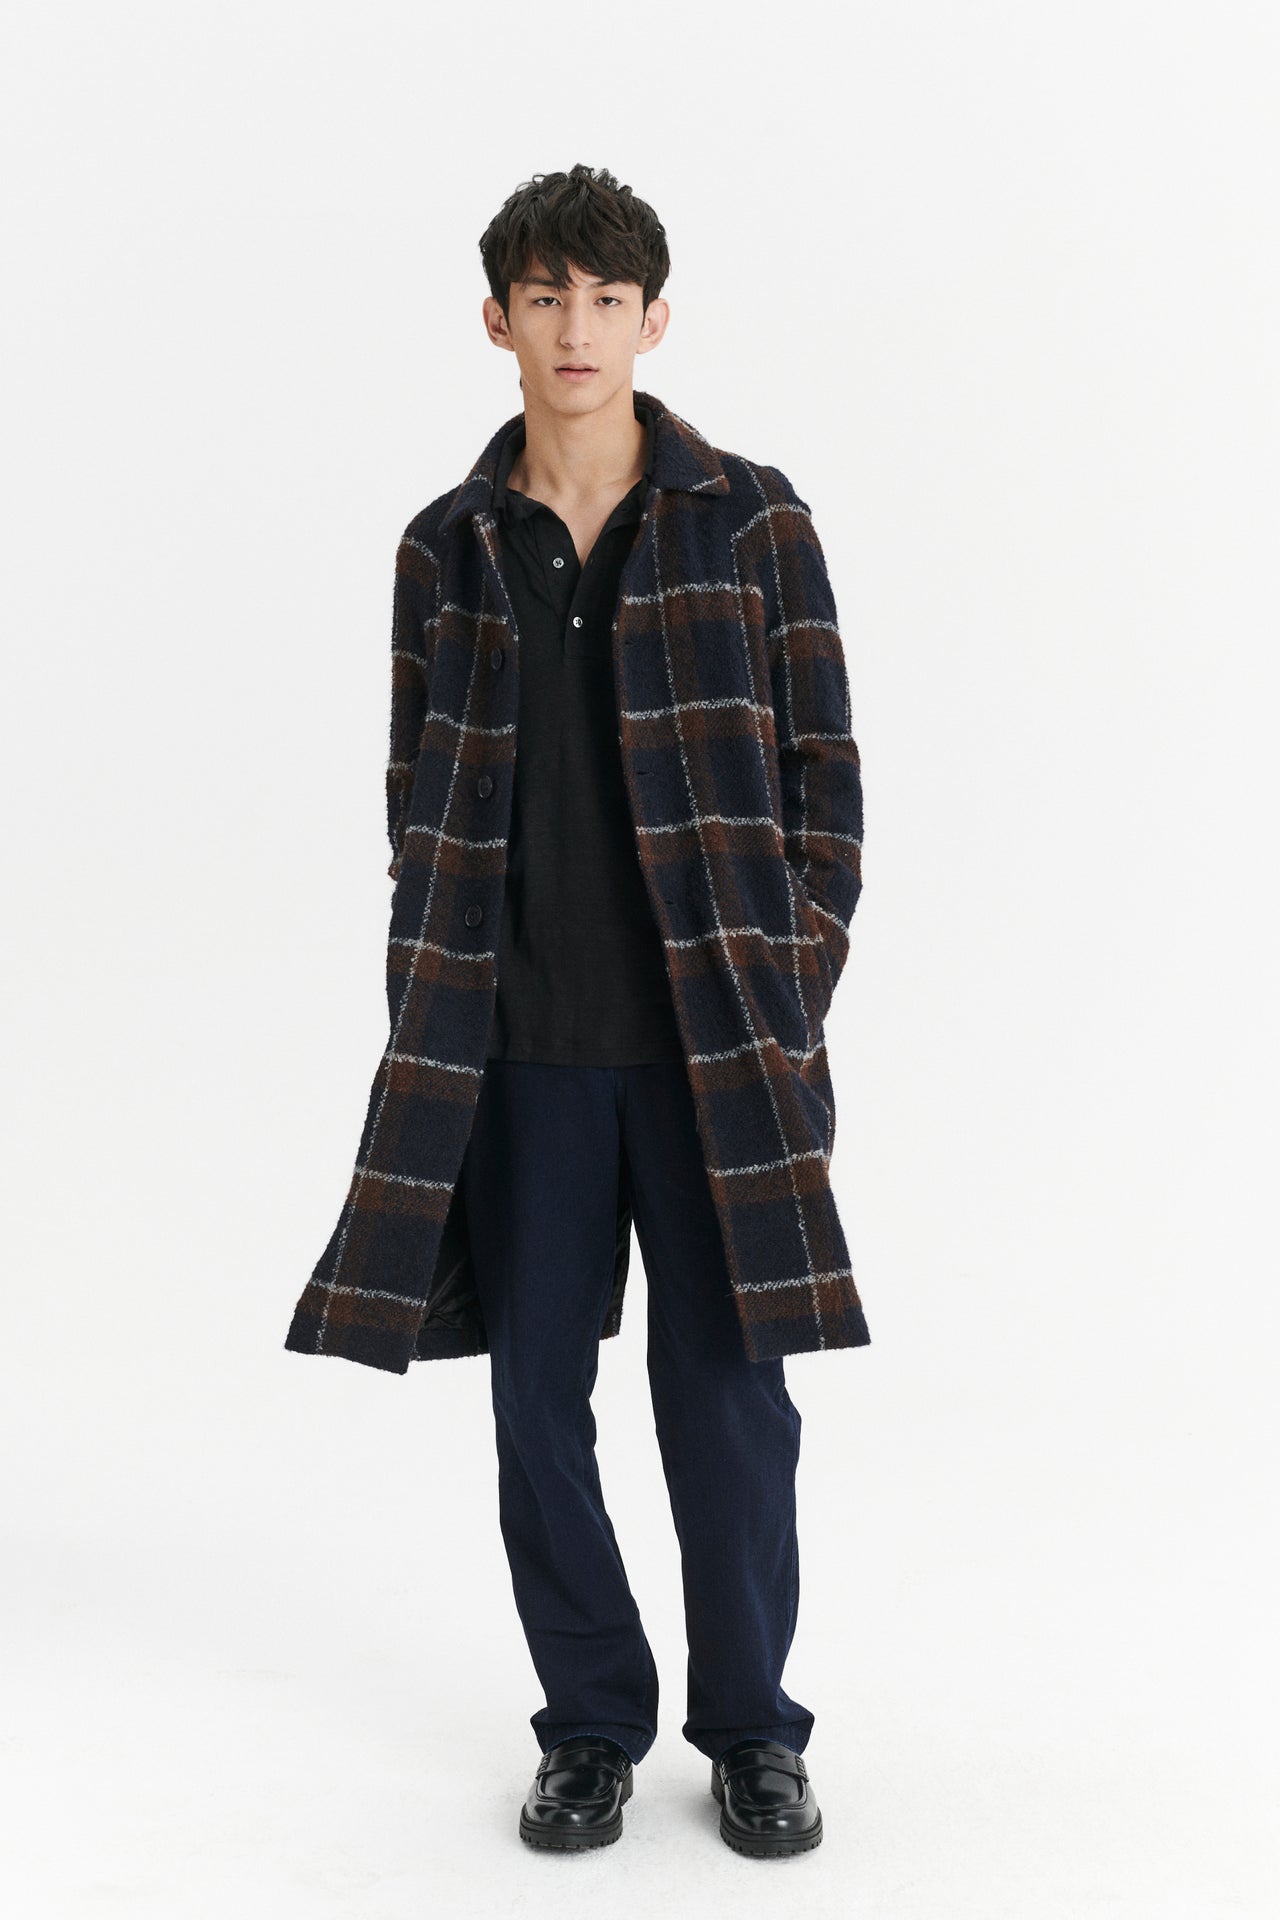 Raglan Coat in a Brown and Navy Chequered Italian Virgin and Alpaca  Bouclé Wool and Meida Thermo Insulation